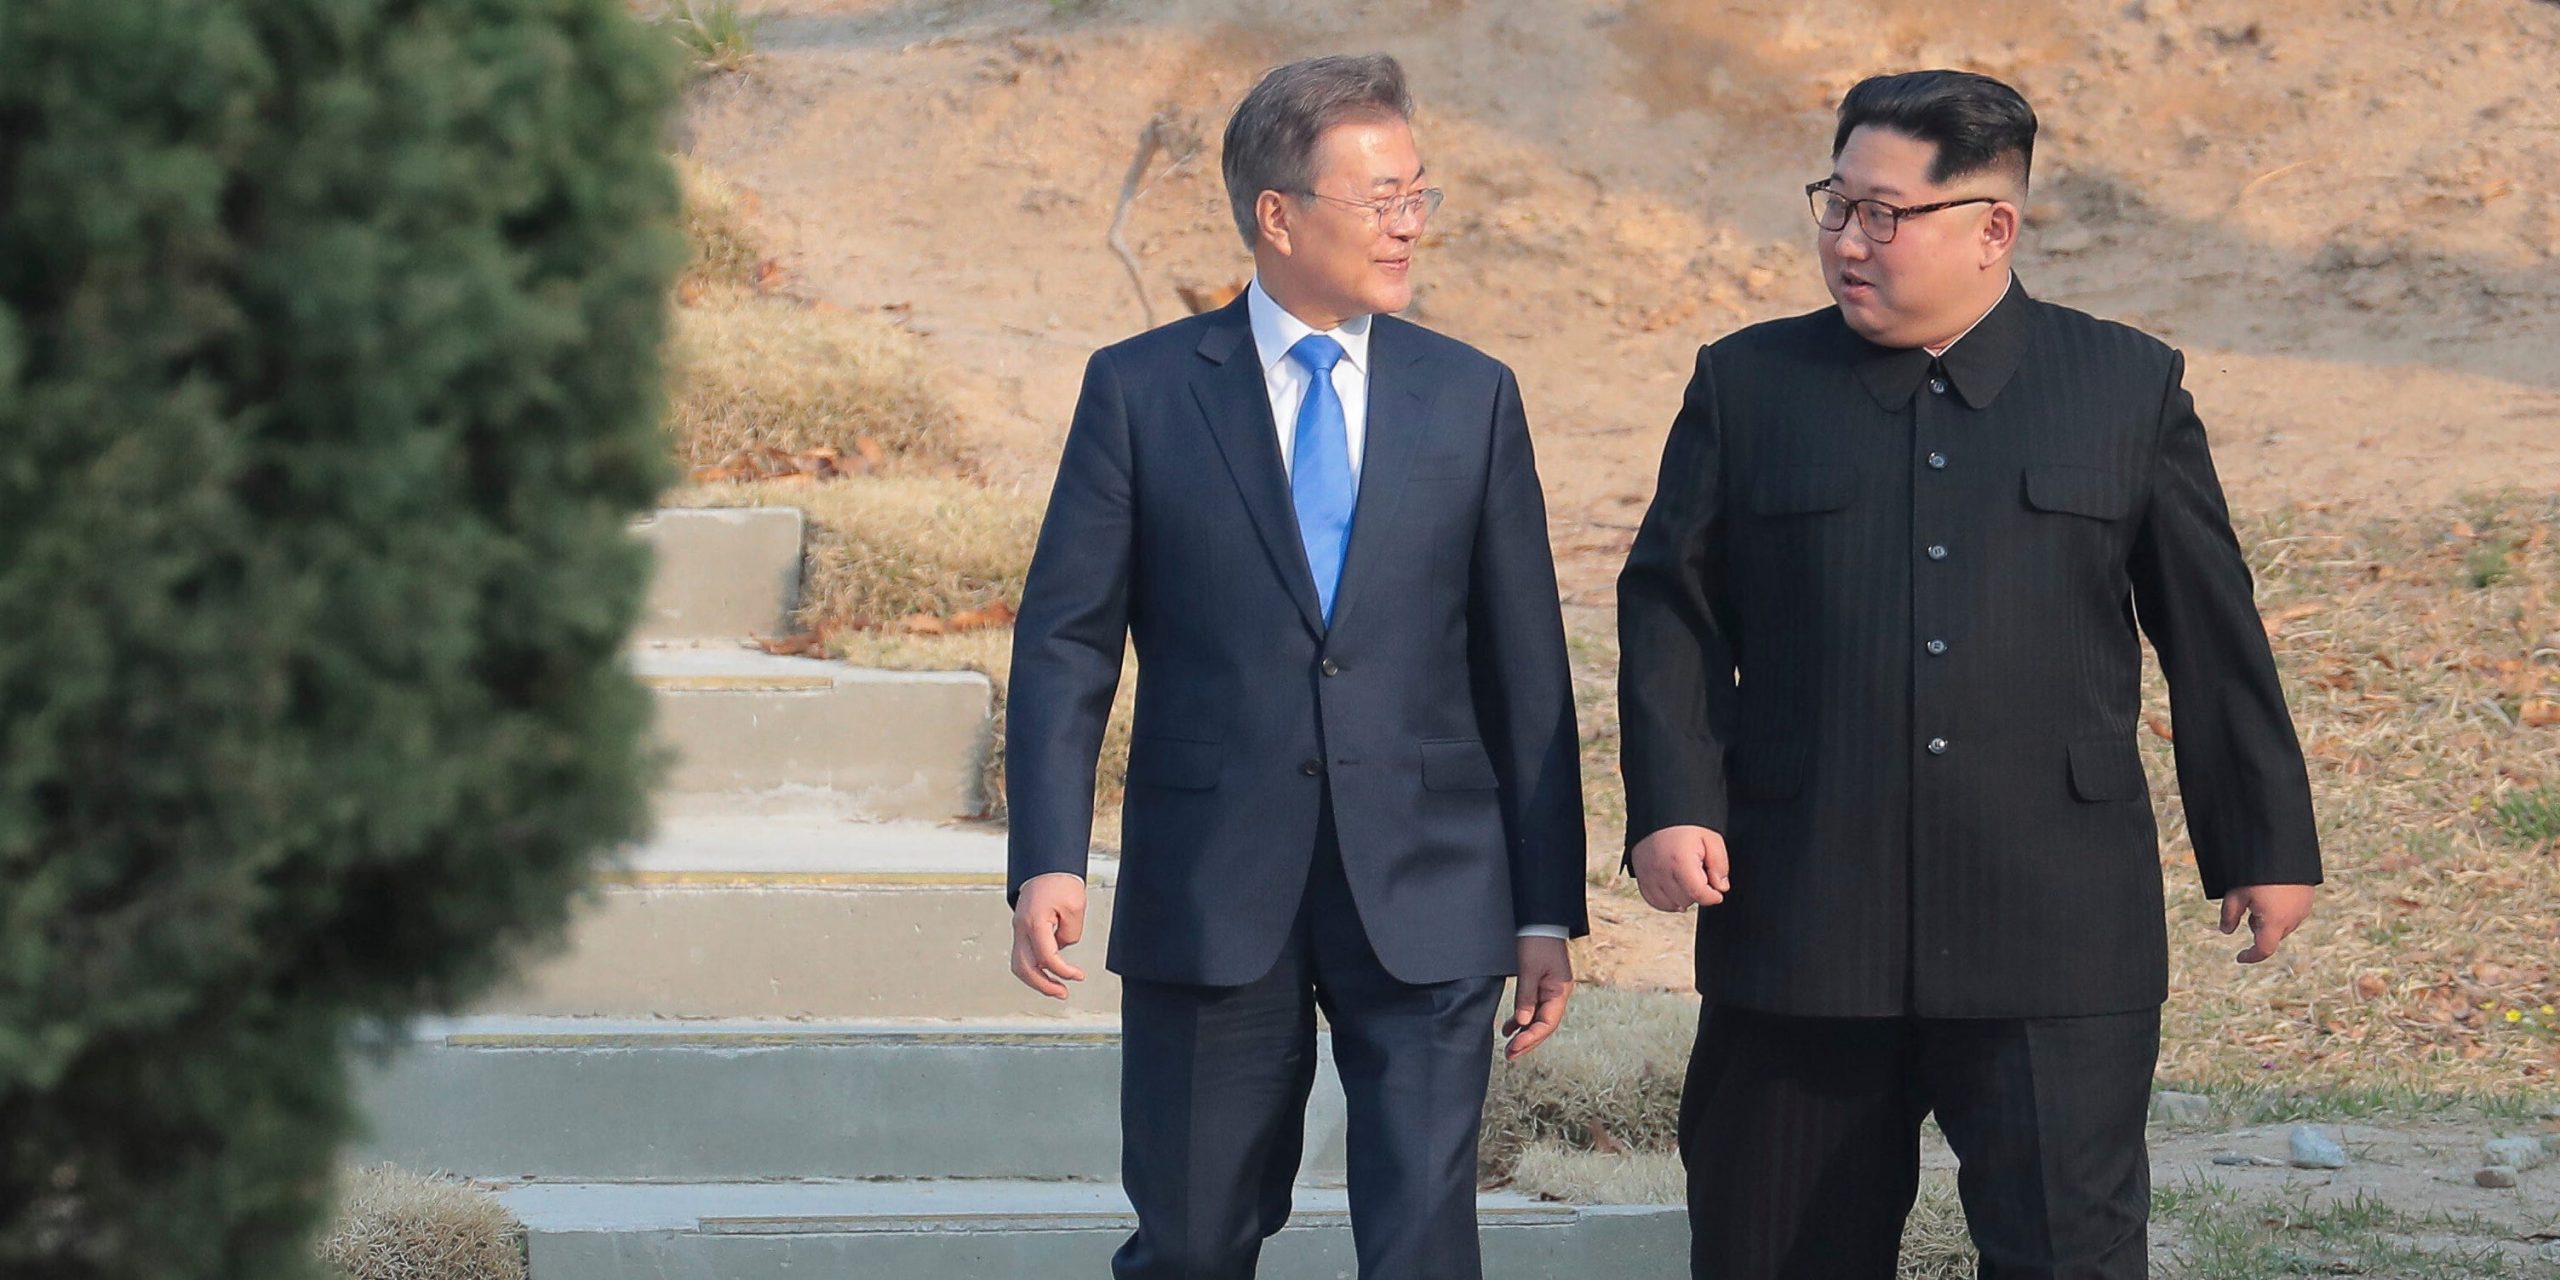 North Korean leader Kim Jong Un, right, and South Korean President Moon Jae-in stroll together at the border village of Panmunjom in the Demilitarized Zone, South Korea